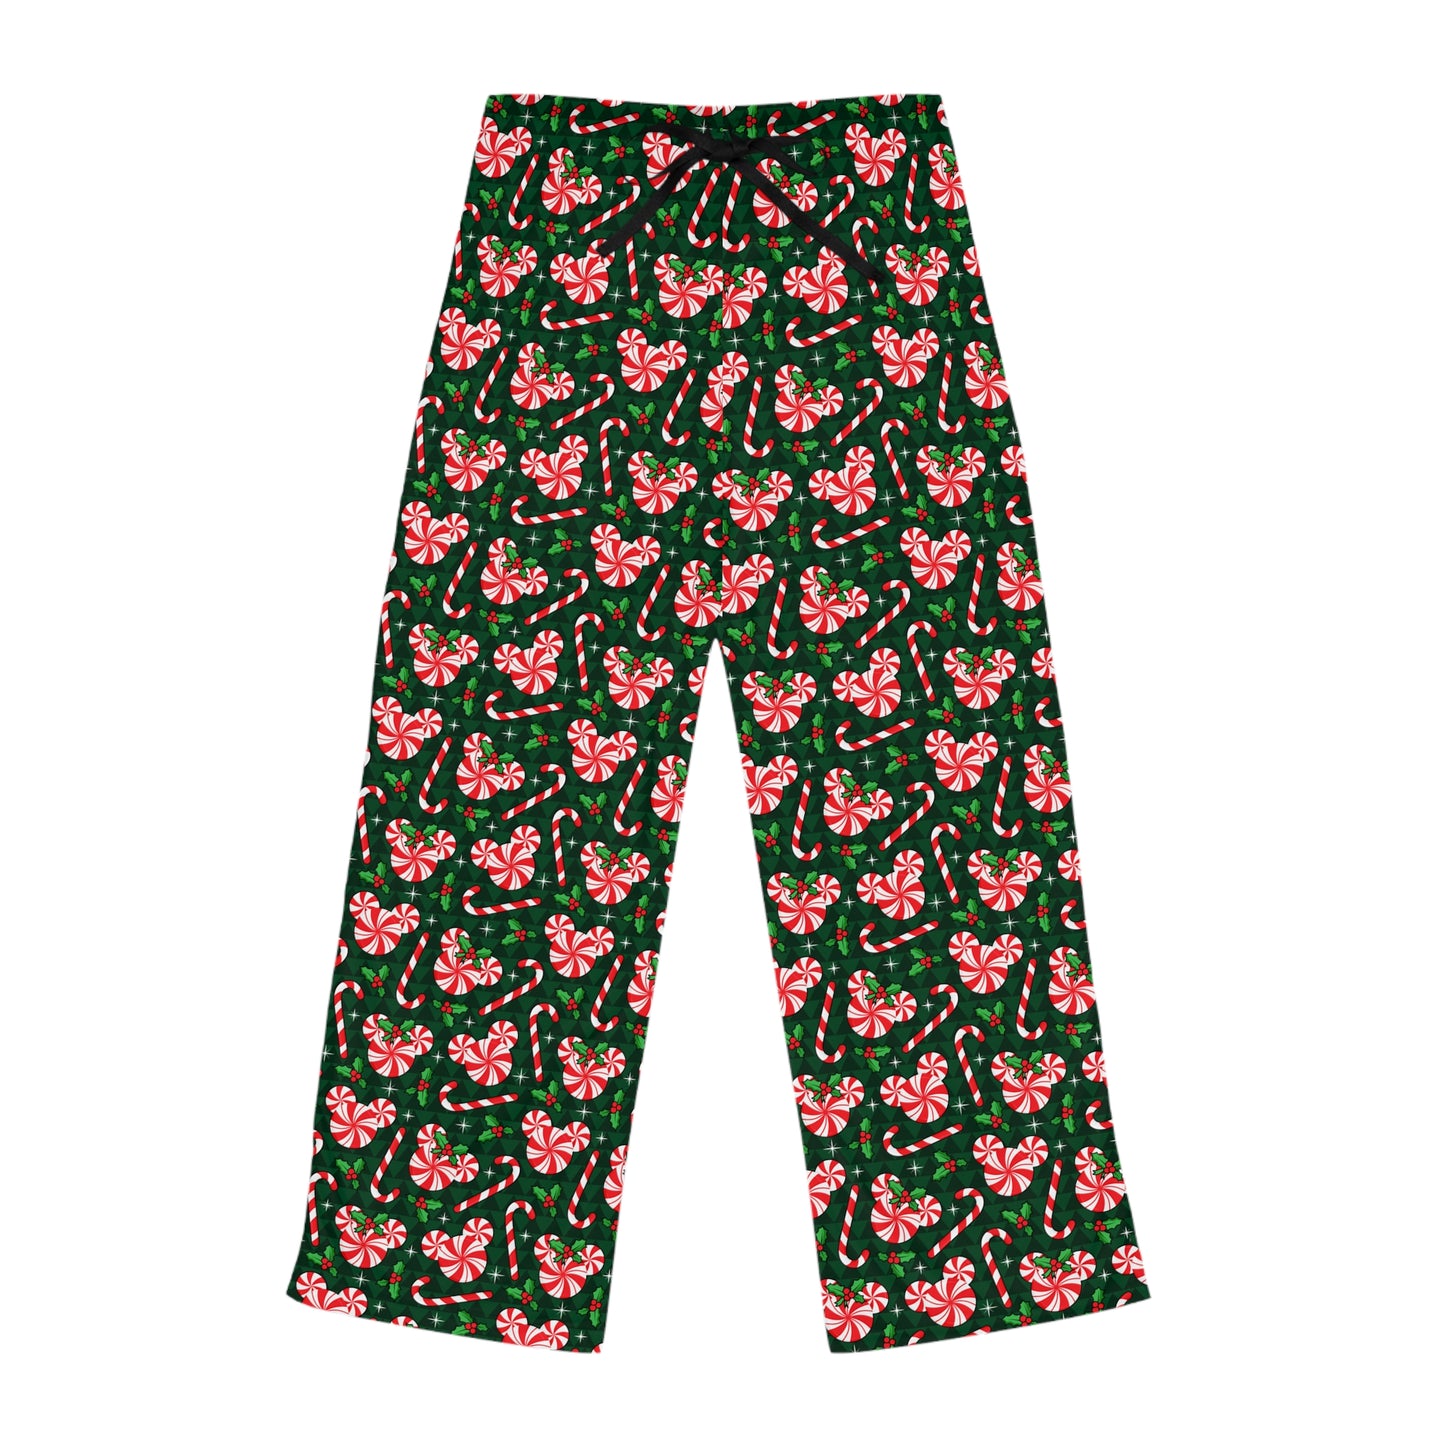 Peppermint Candy Women's Pajama Pants